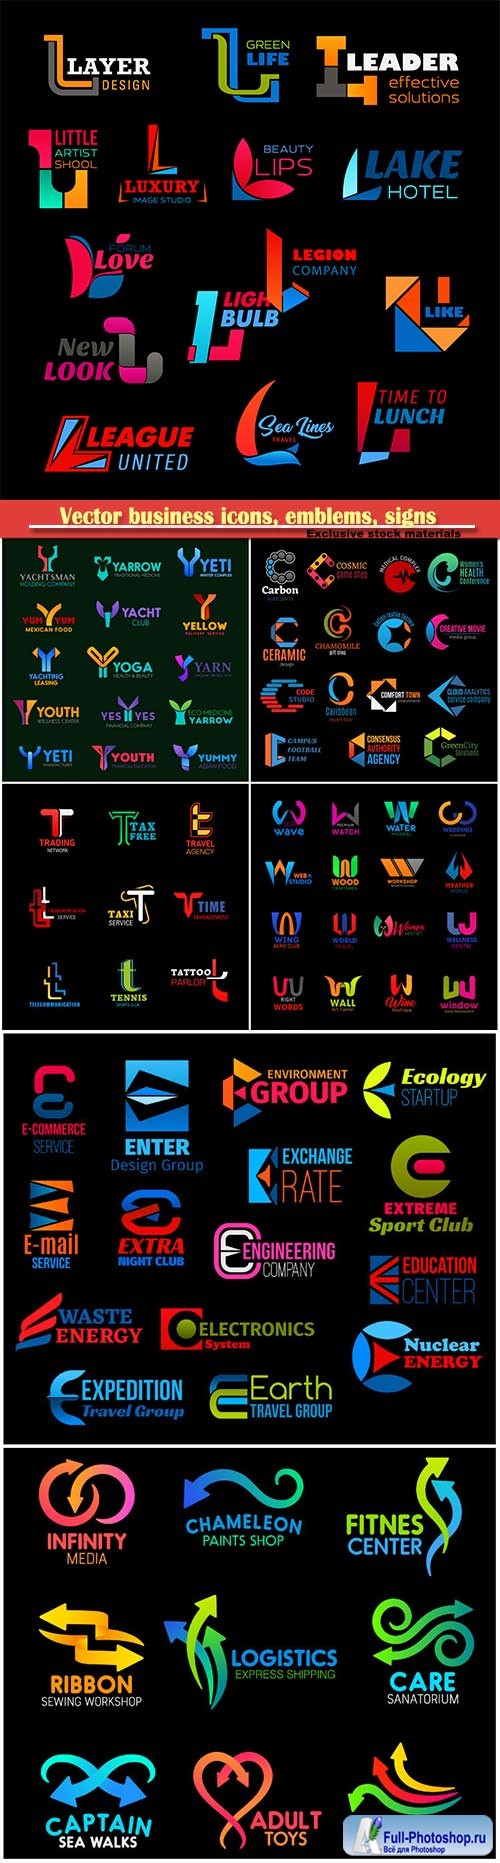 Vector business icons, emblems, signs and symbols